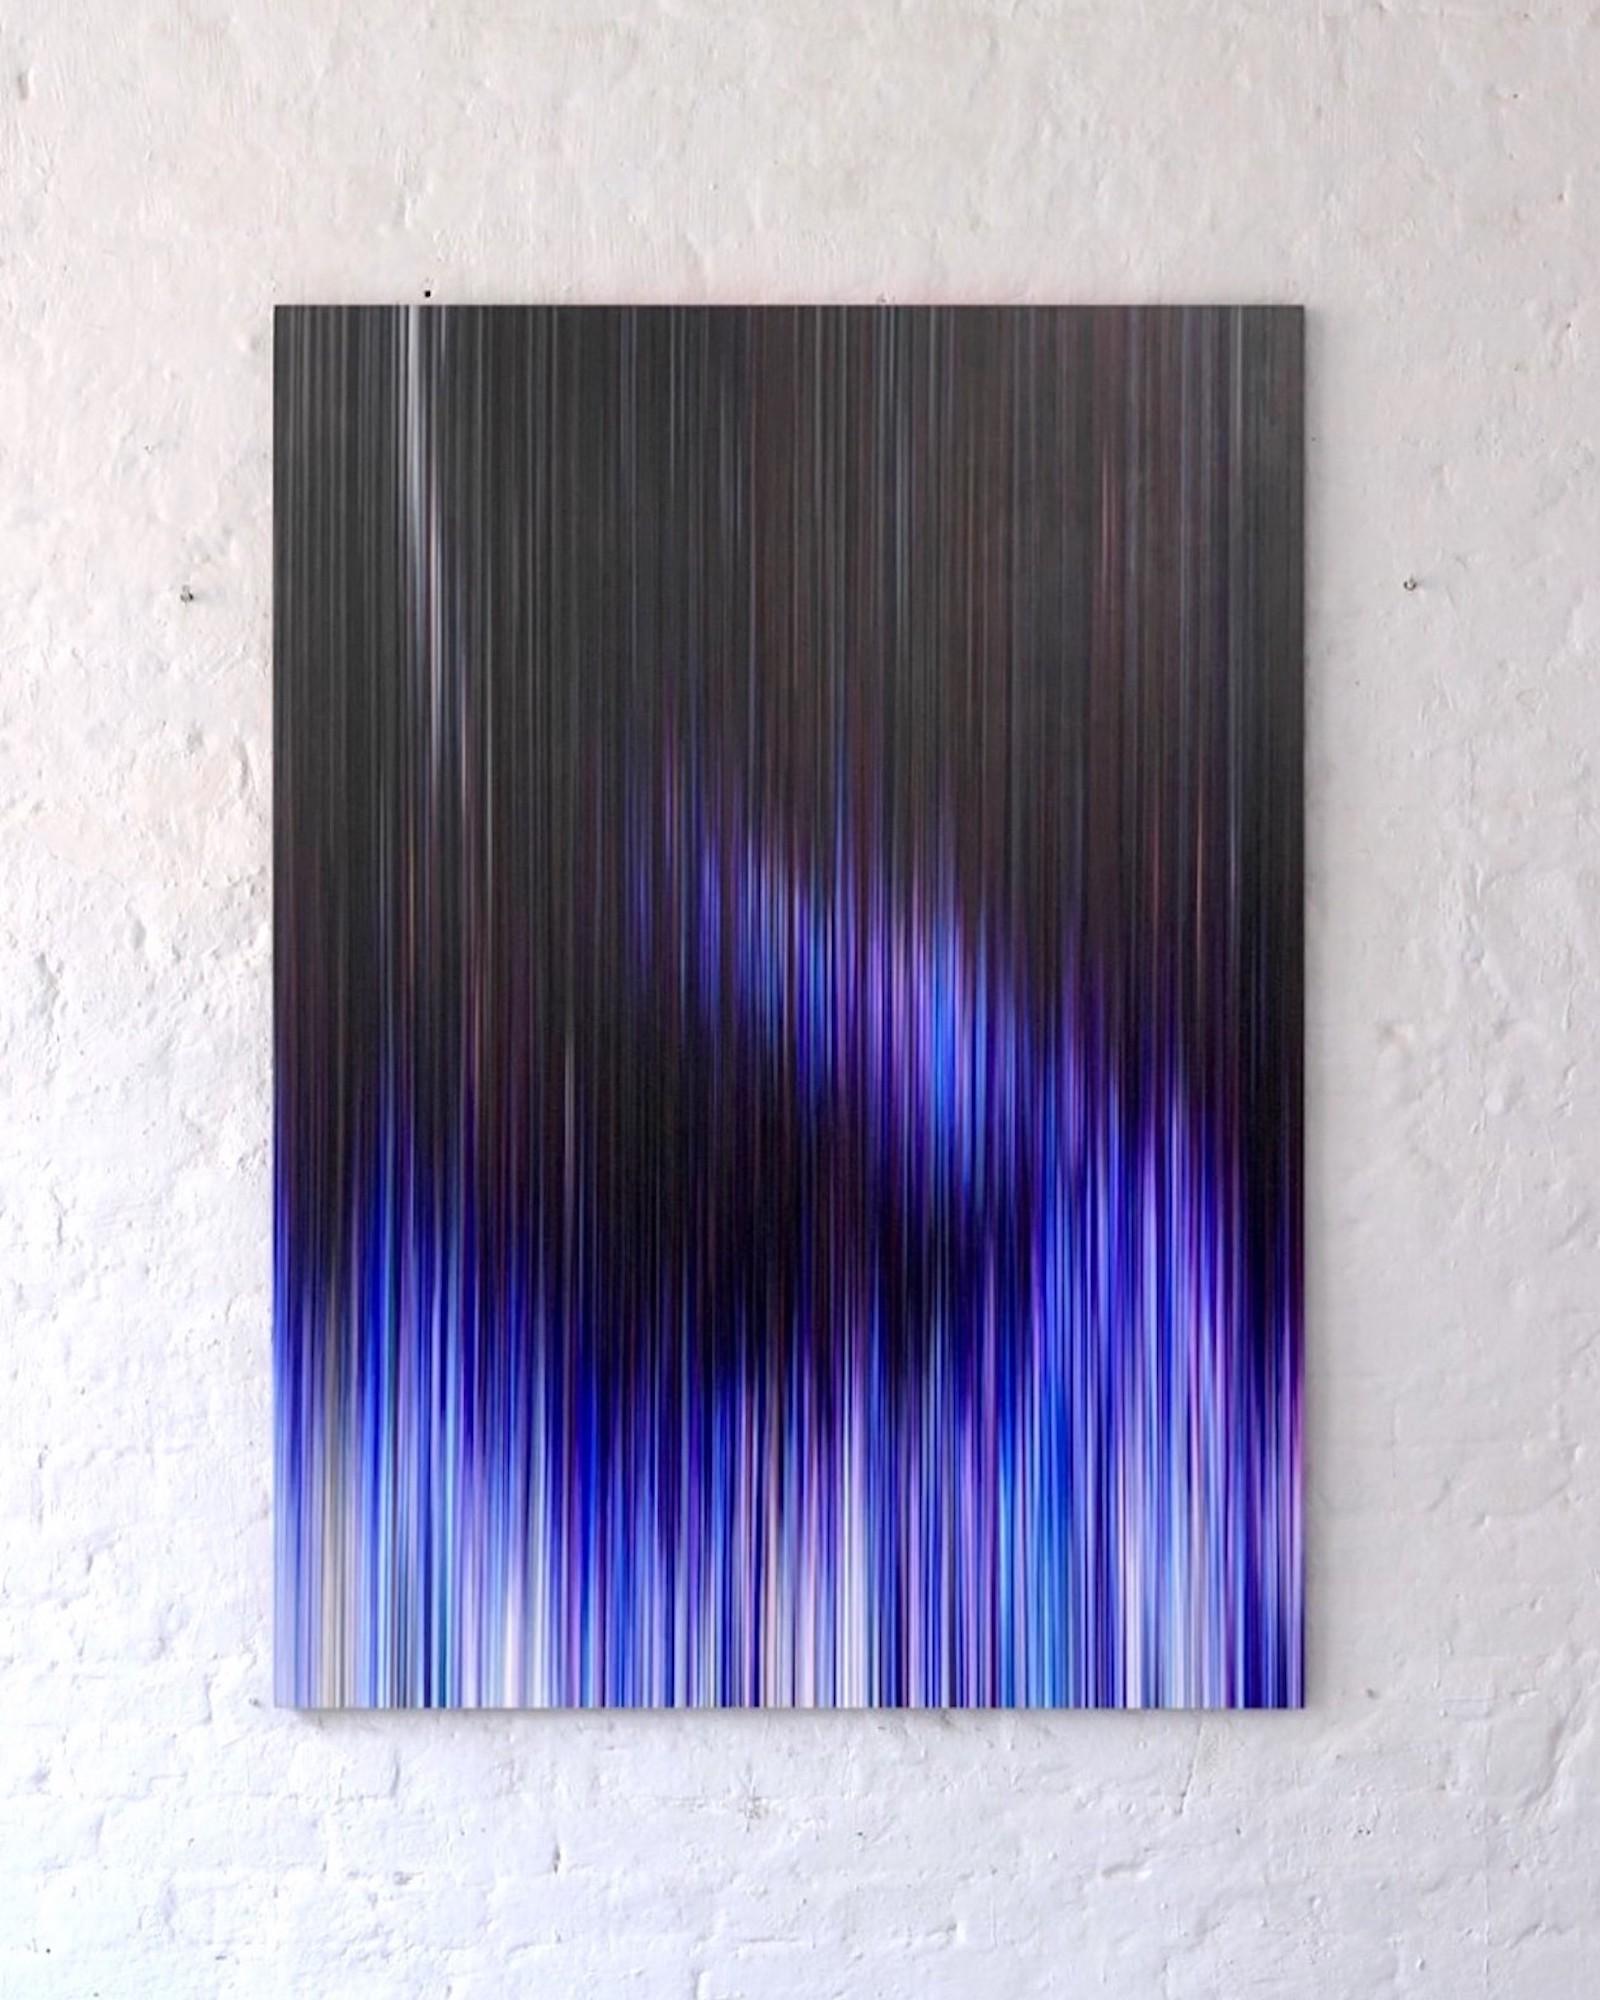 Light’n’Lines No.33 is a unique oil on Alu-Dibond painting by contemporary artist Doris Marten, dimensions are 150 × 110 cm (59.1 × 43.3 in).
The artwork is signed, sold unframed and comes with a certificate of authenticity.

The visual effects